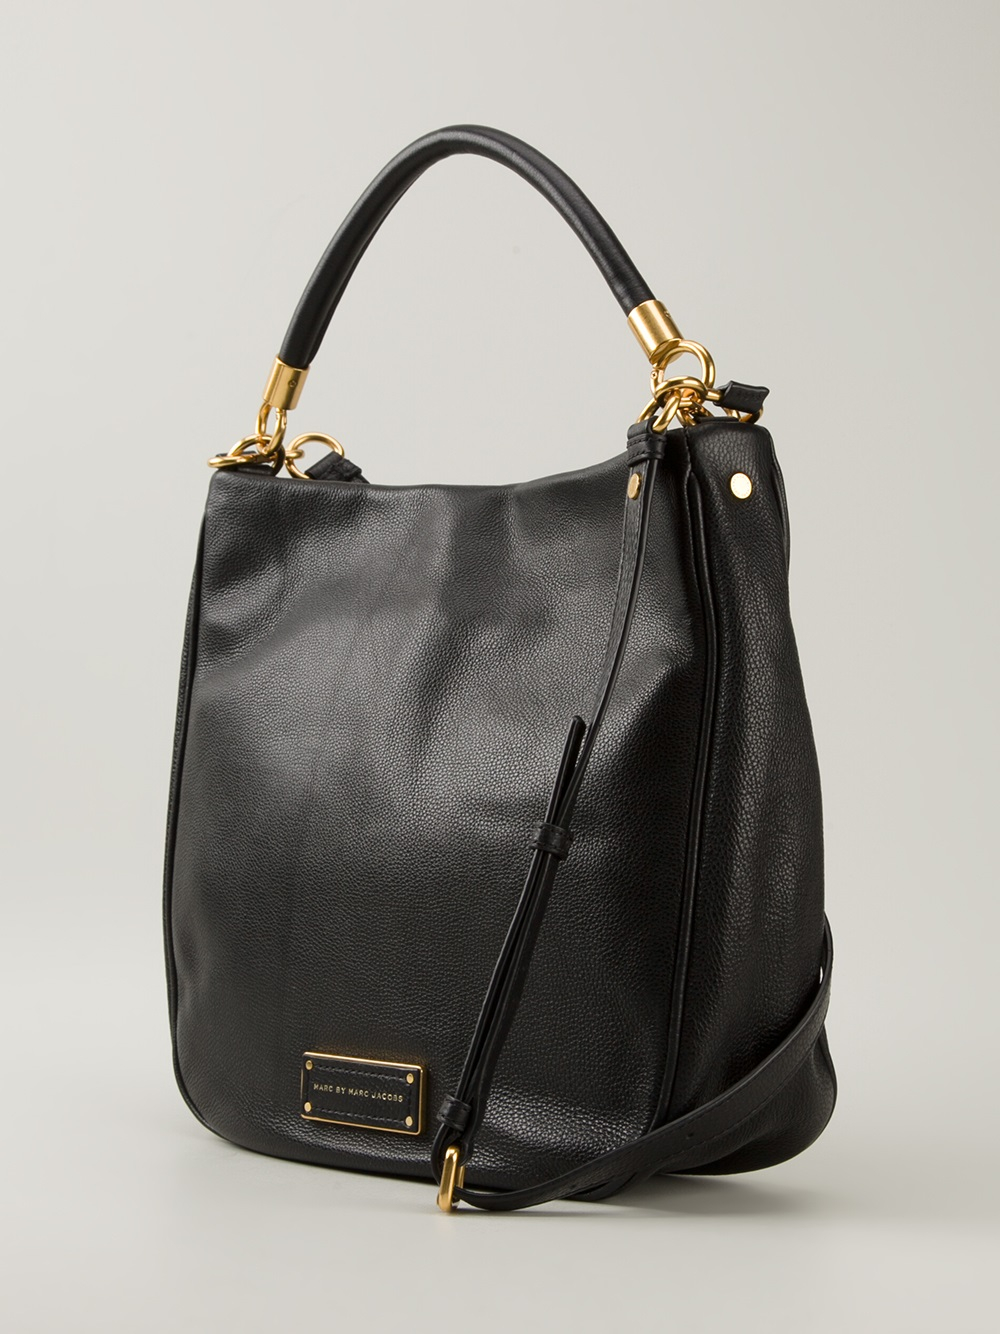 Marc by marc jacobs 'Too Hot To Handle' Hobo Bag in Black | Lyst